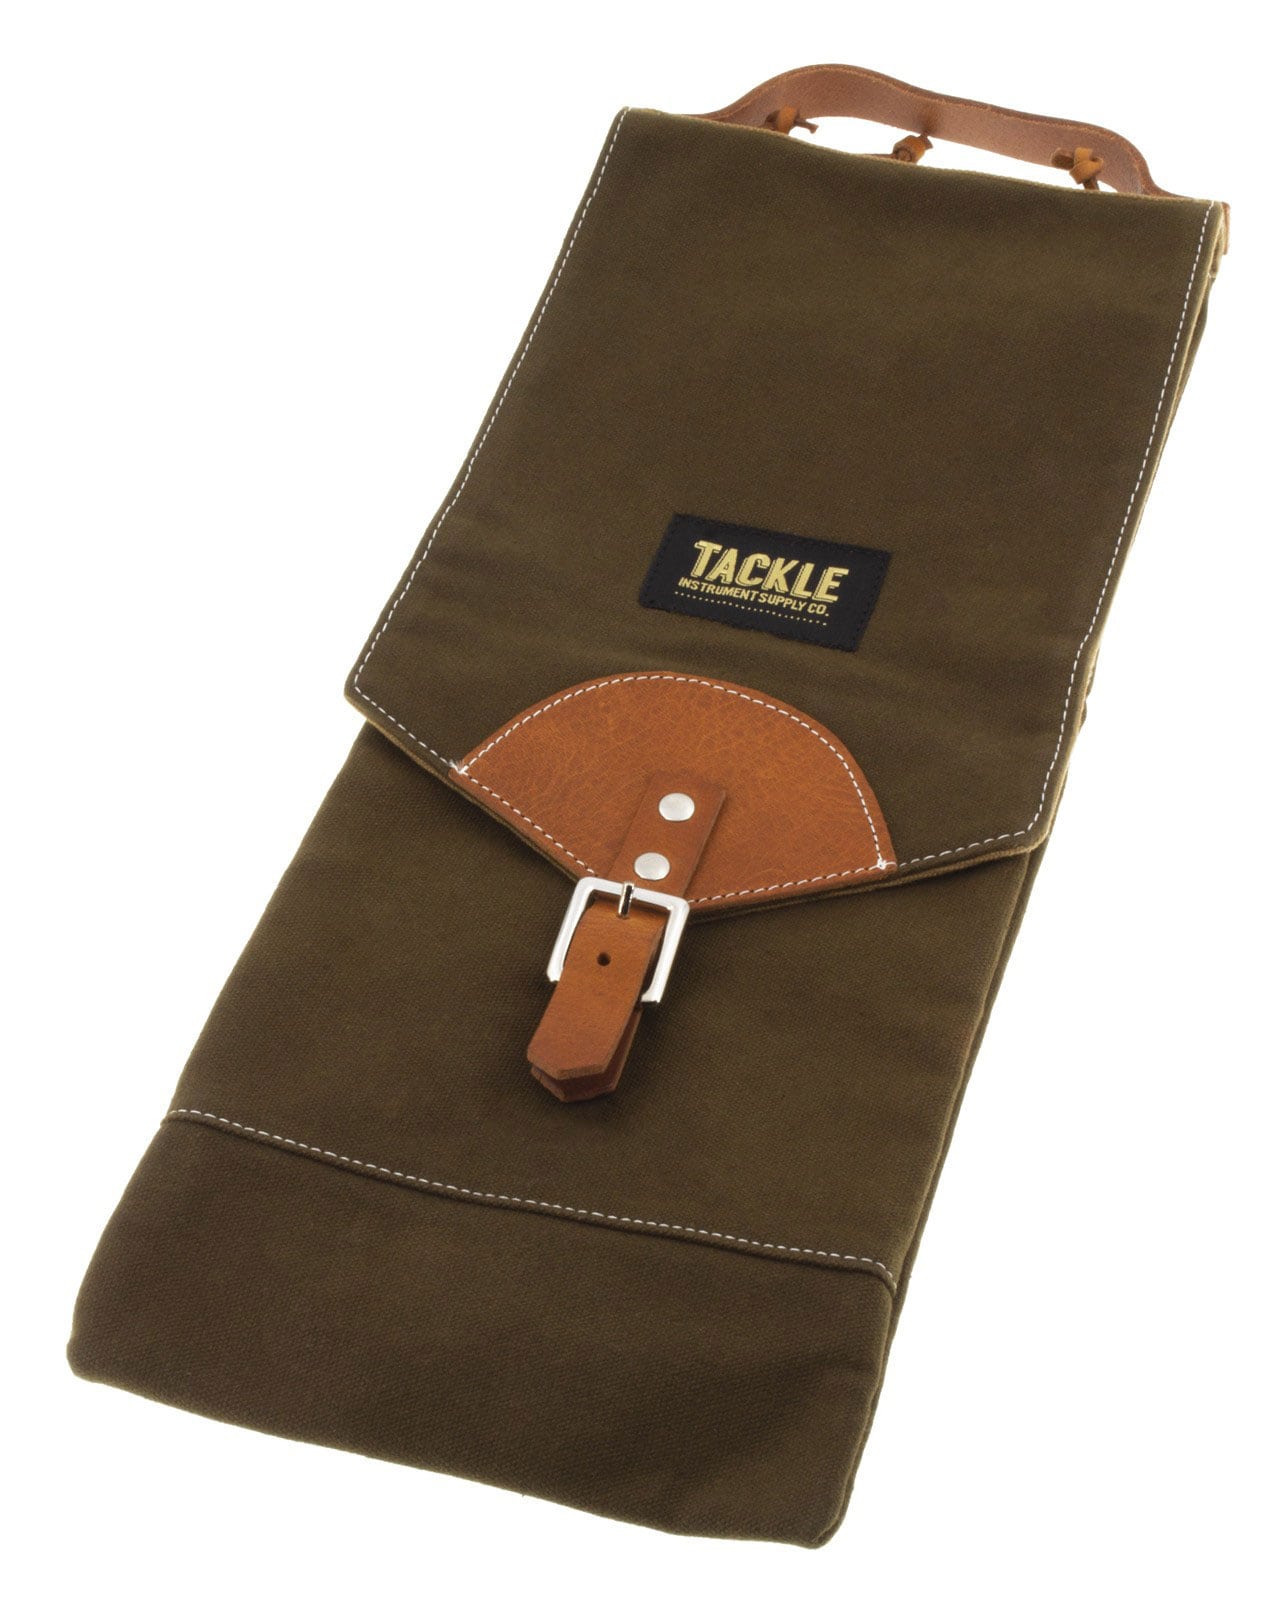 TACKLE INSTRUMENTS SAC BAGUETTES WAXED CANVAS - VERT